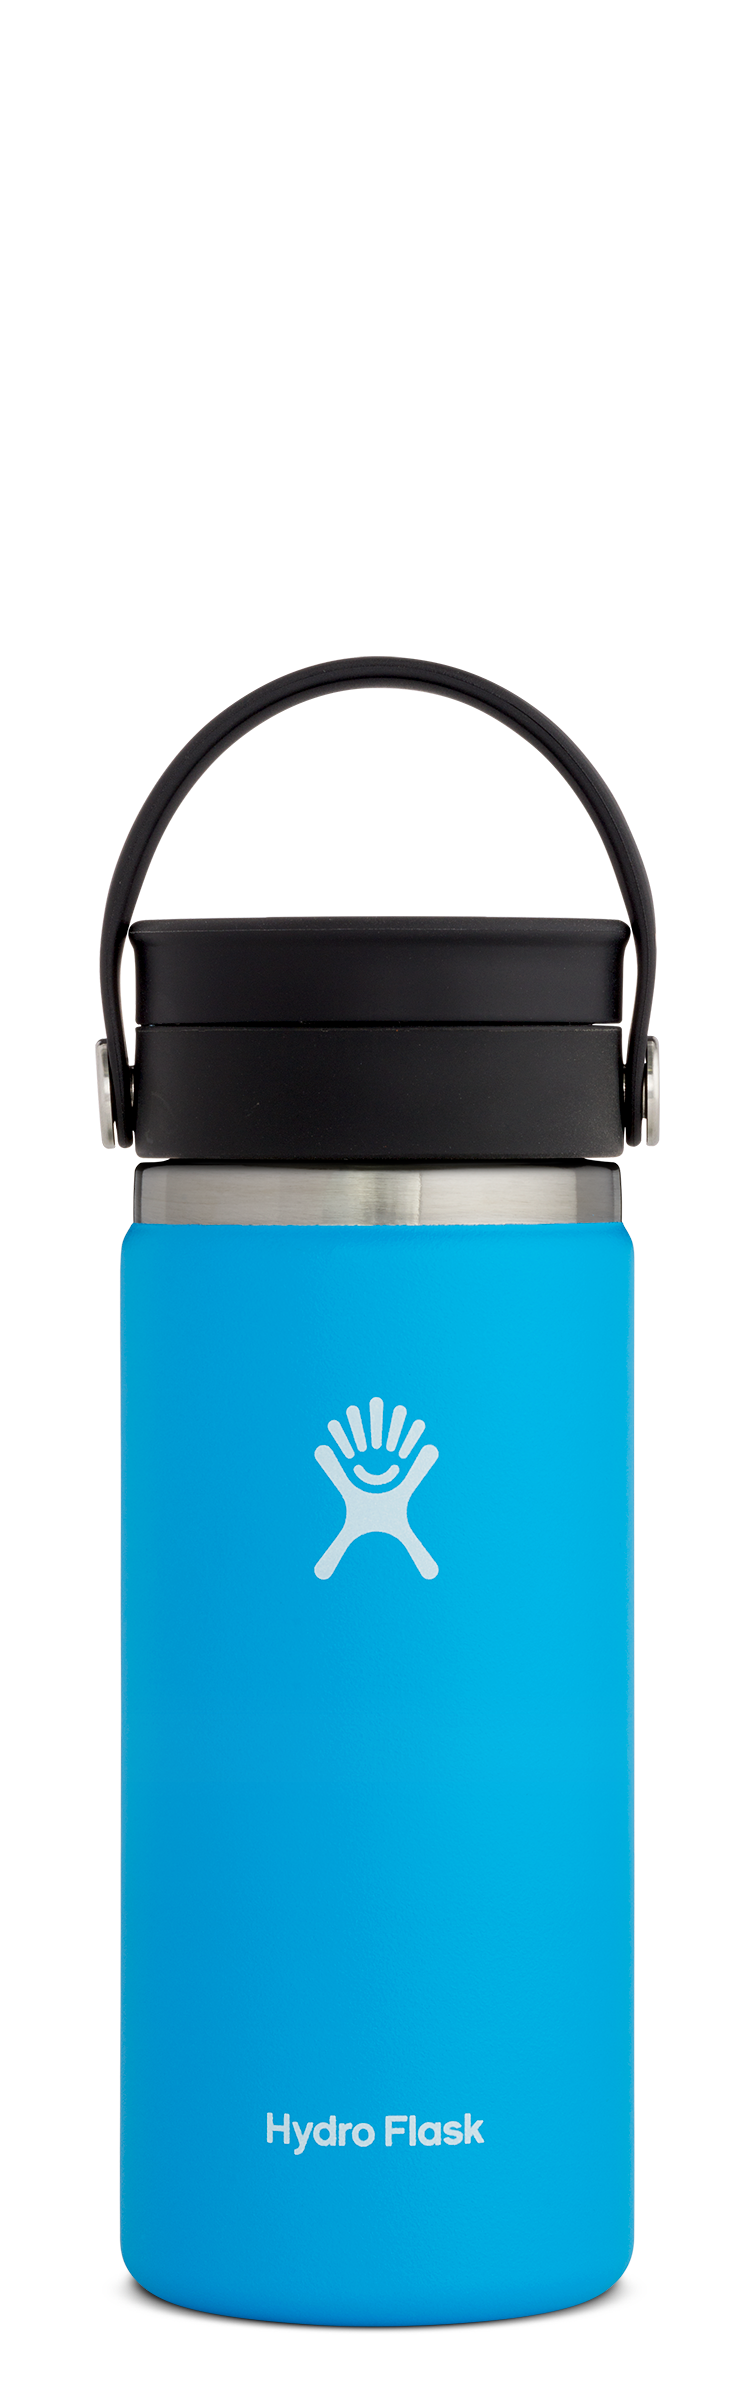 Blue Hydro Flask PNG Pic